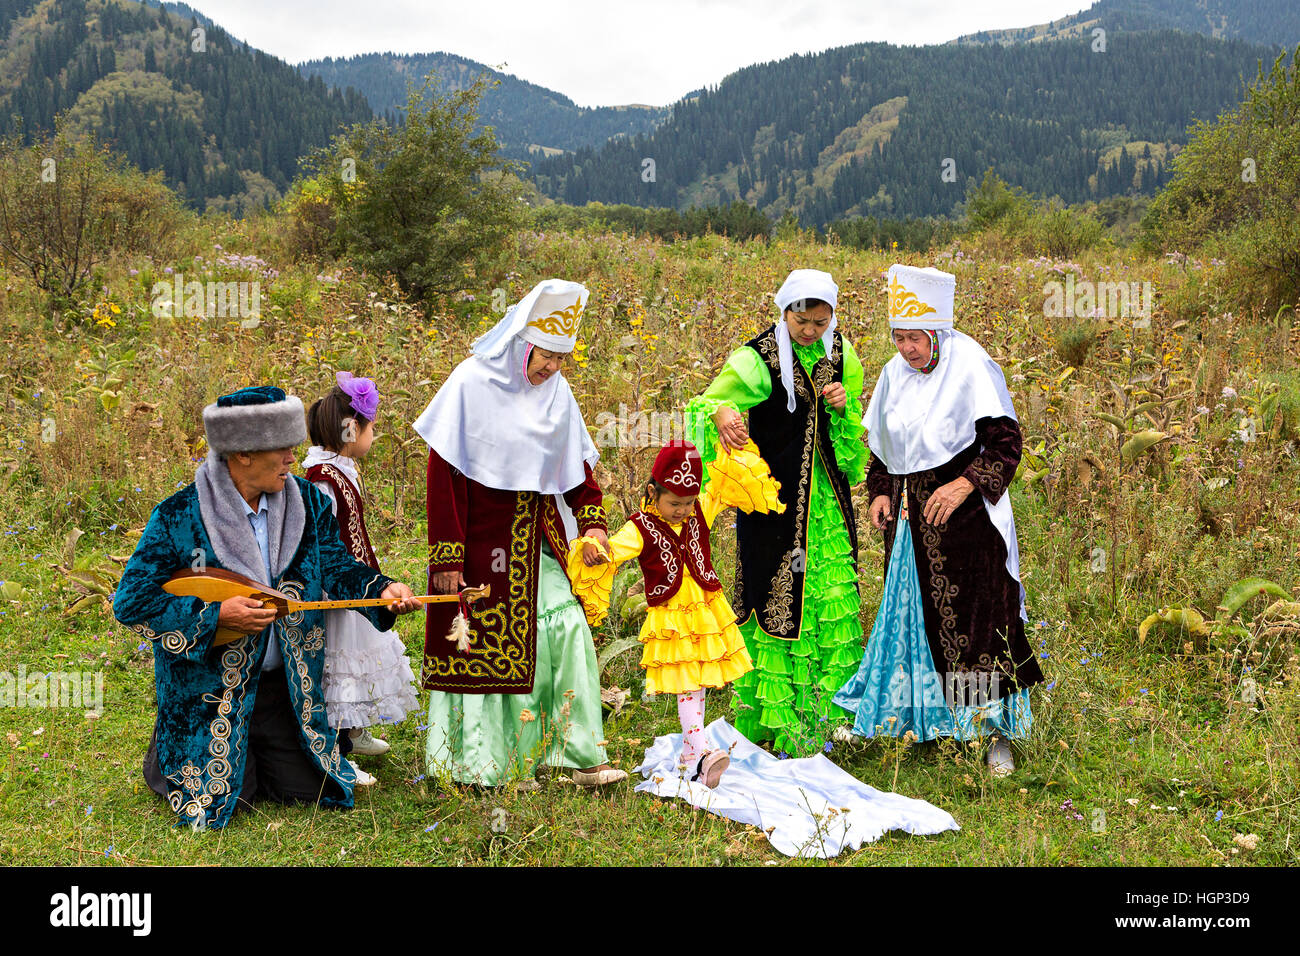 Kazakh women showing local tradition of Tusau Kesu which symbolizes a ceremony that accompanies first steps of a child, in Almaty, Kazakhstan Stock Photo